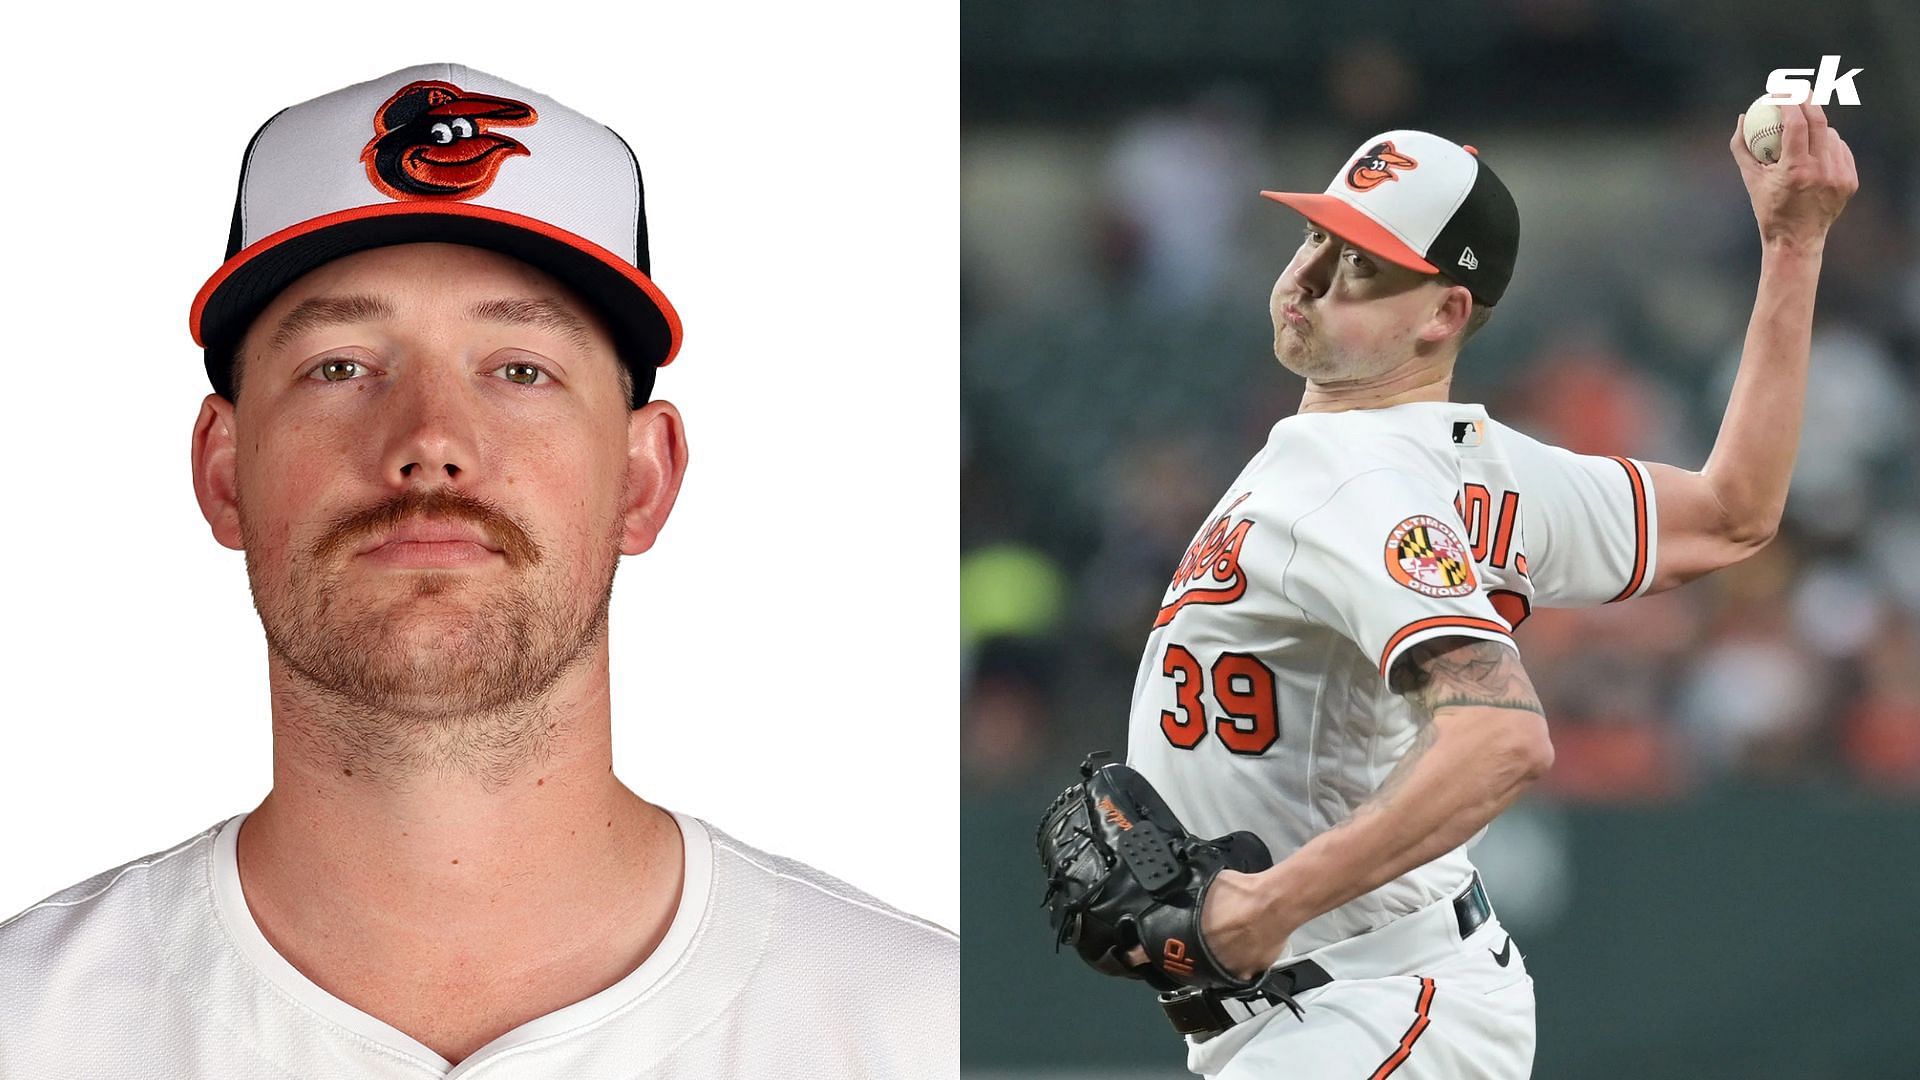 Kyle Bradish Injury Update: Orioles pitcher set to return to rotation following UCL sprain